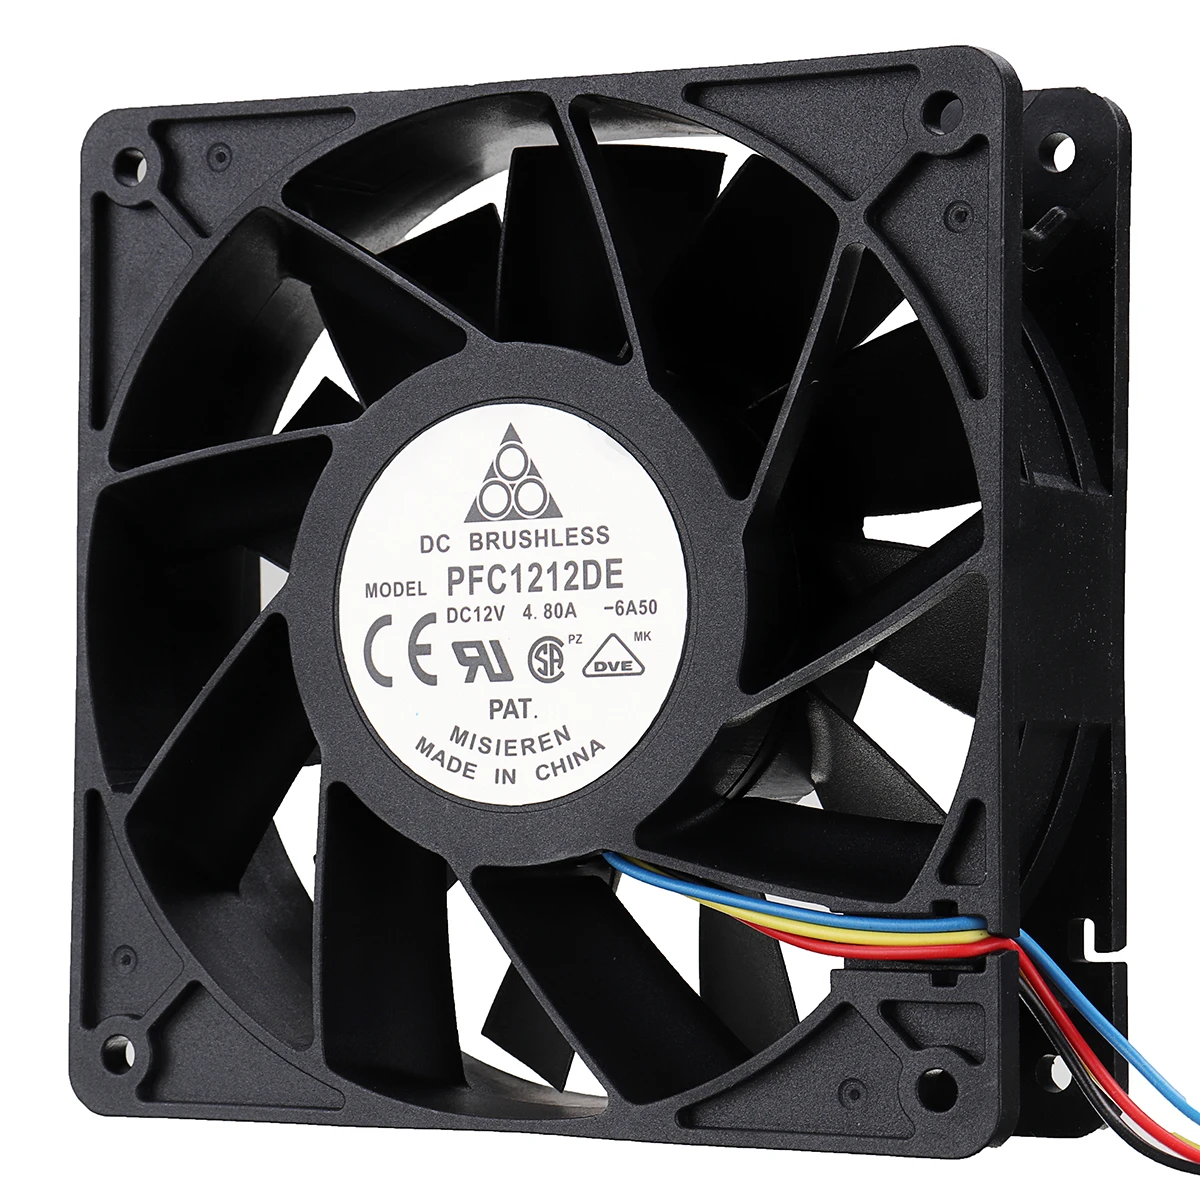 120x120 S7 S9 Cpu Cooling Fan Connector For Antminer Bitmain 12v/4.8a Portable Computer Cooler Fans - Fans - AliExpress